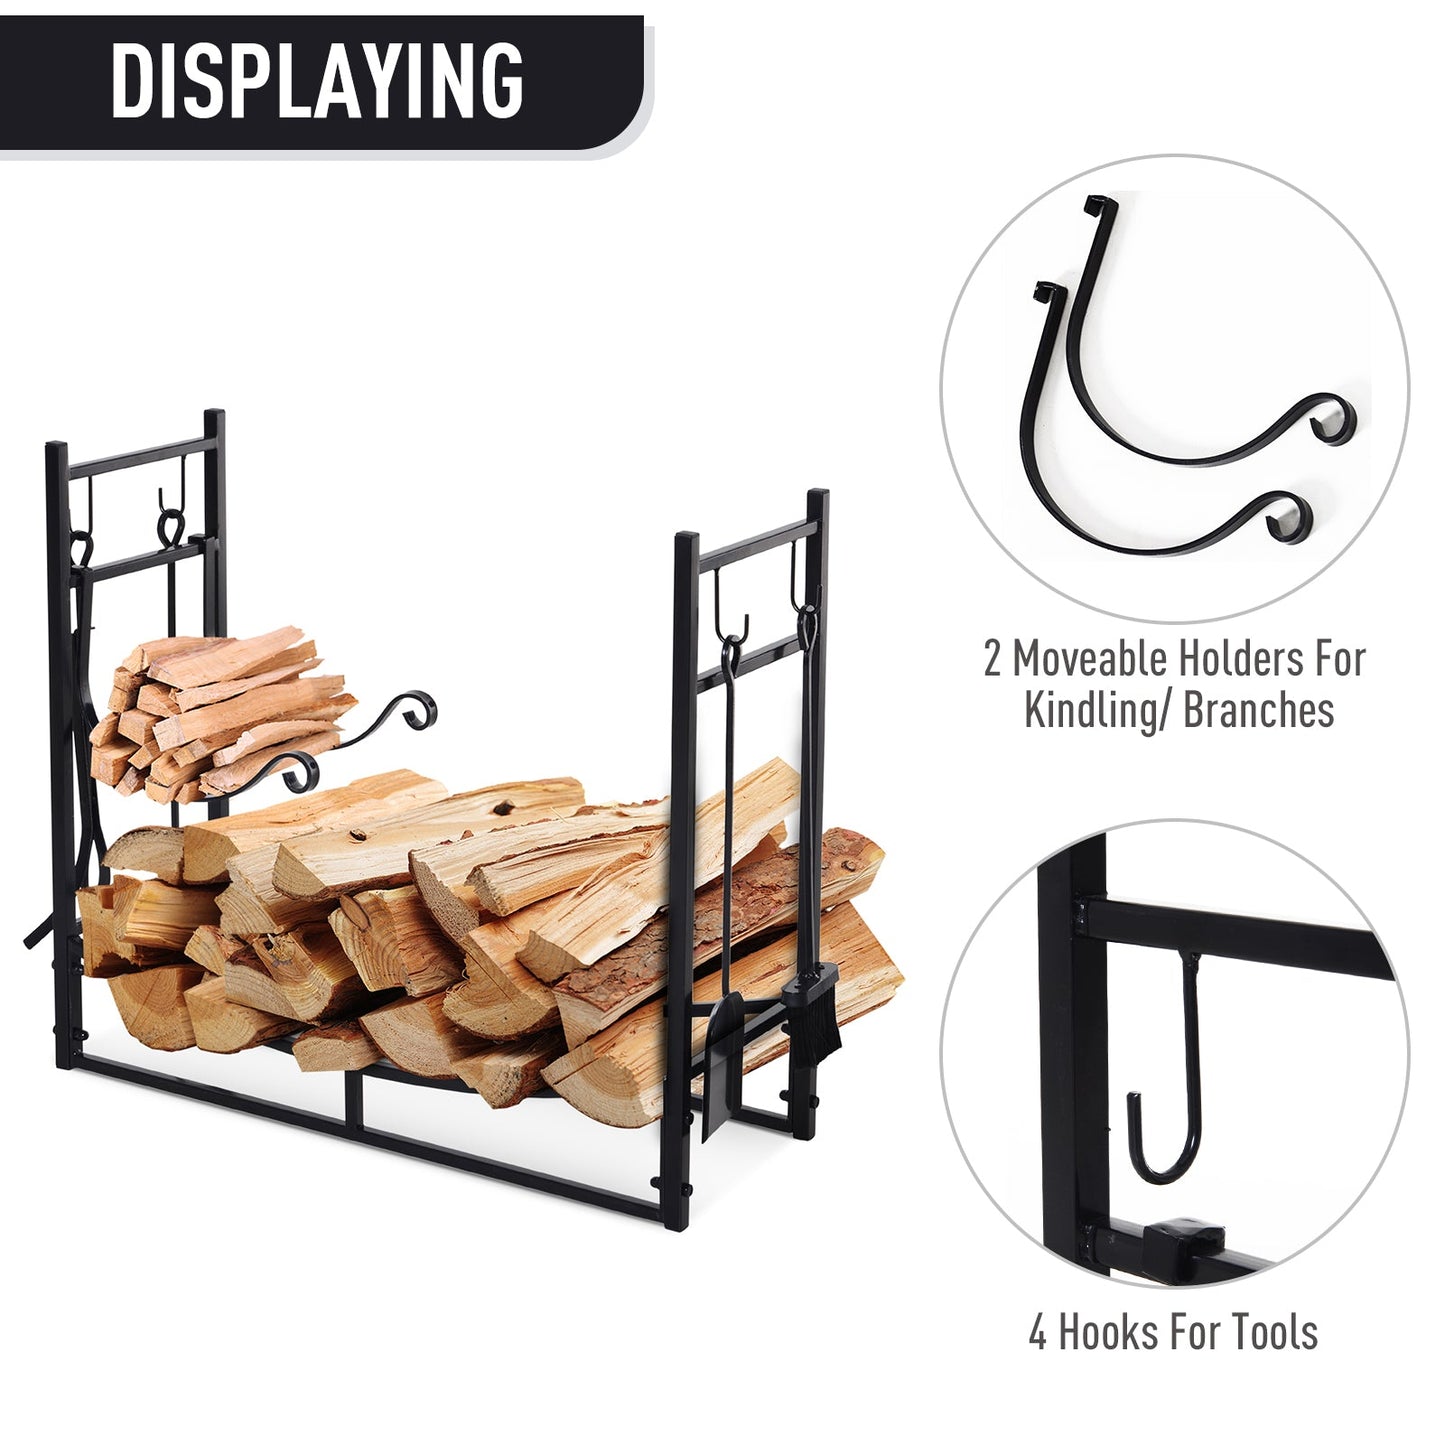 Miscellaneous-Firewood Rack with Fireplace Tools - Outdoor Style Company